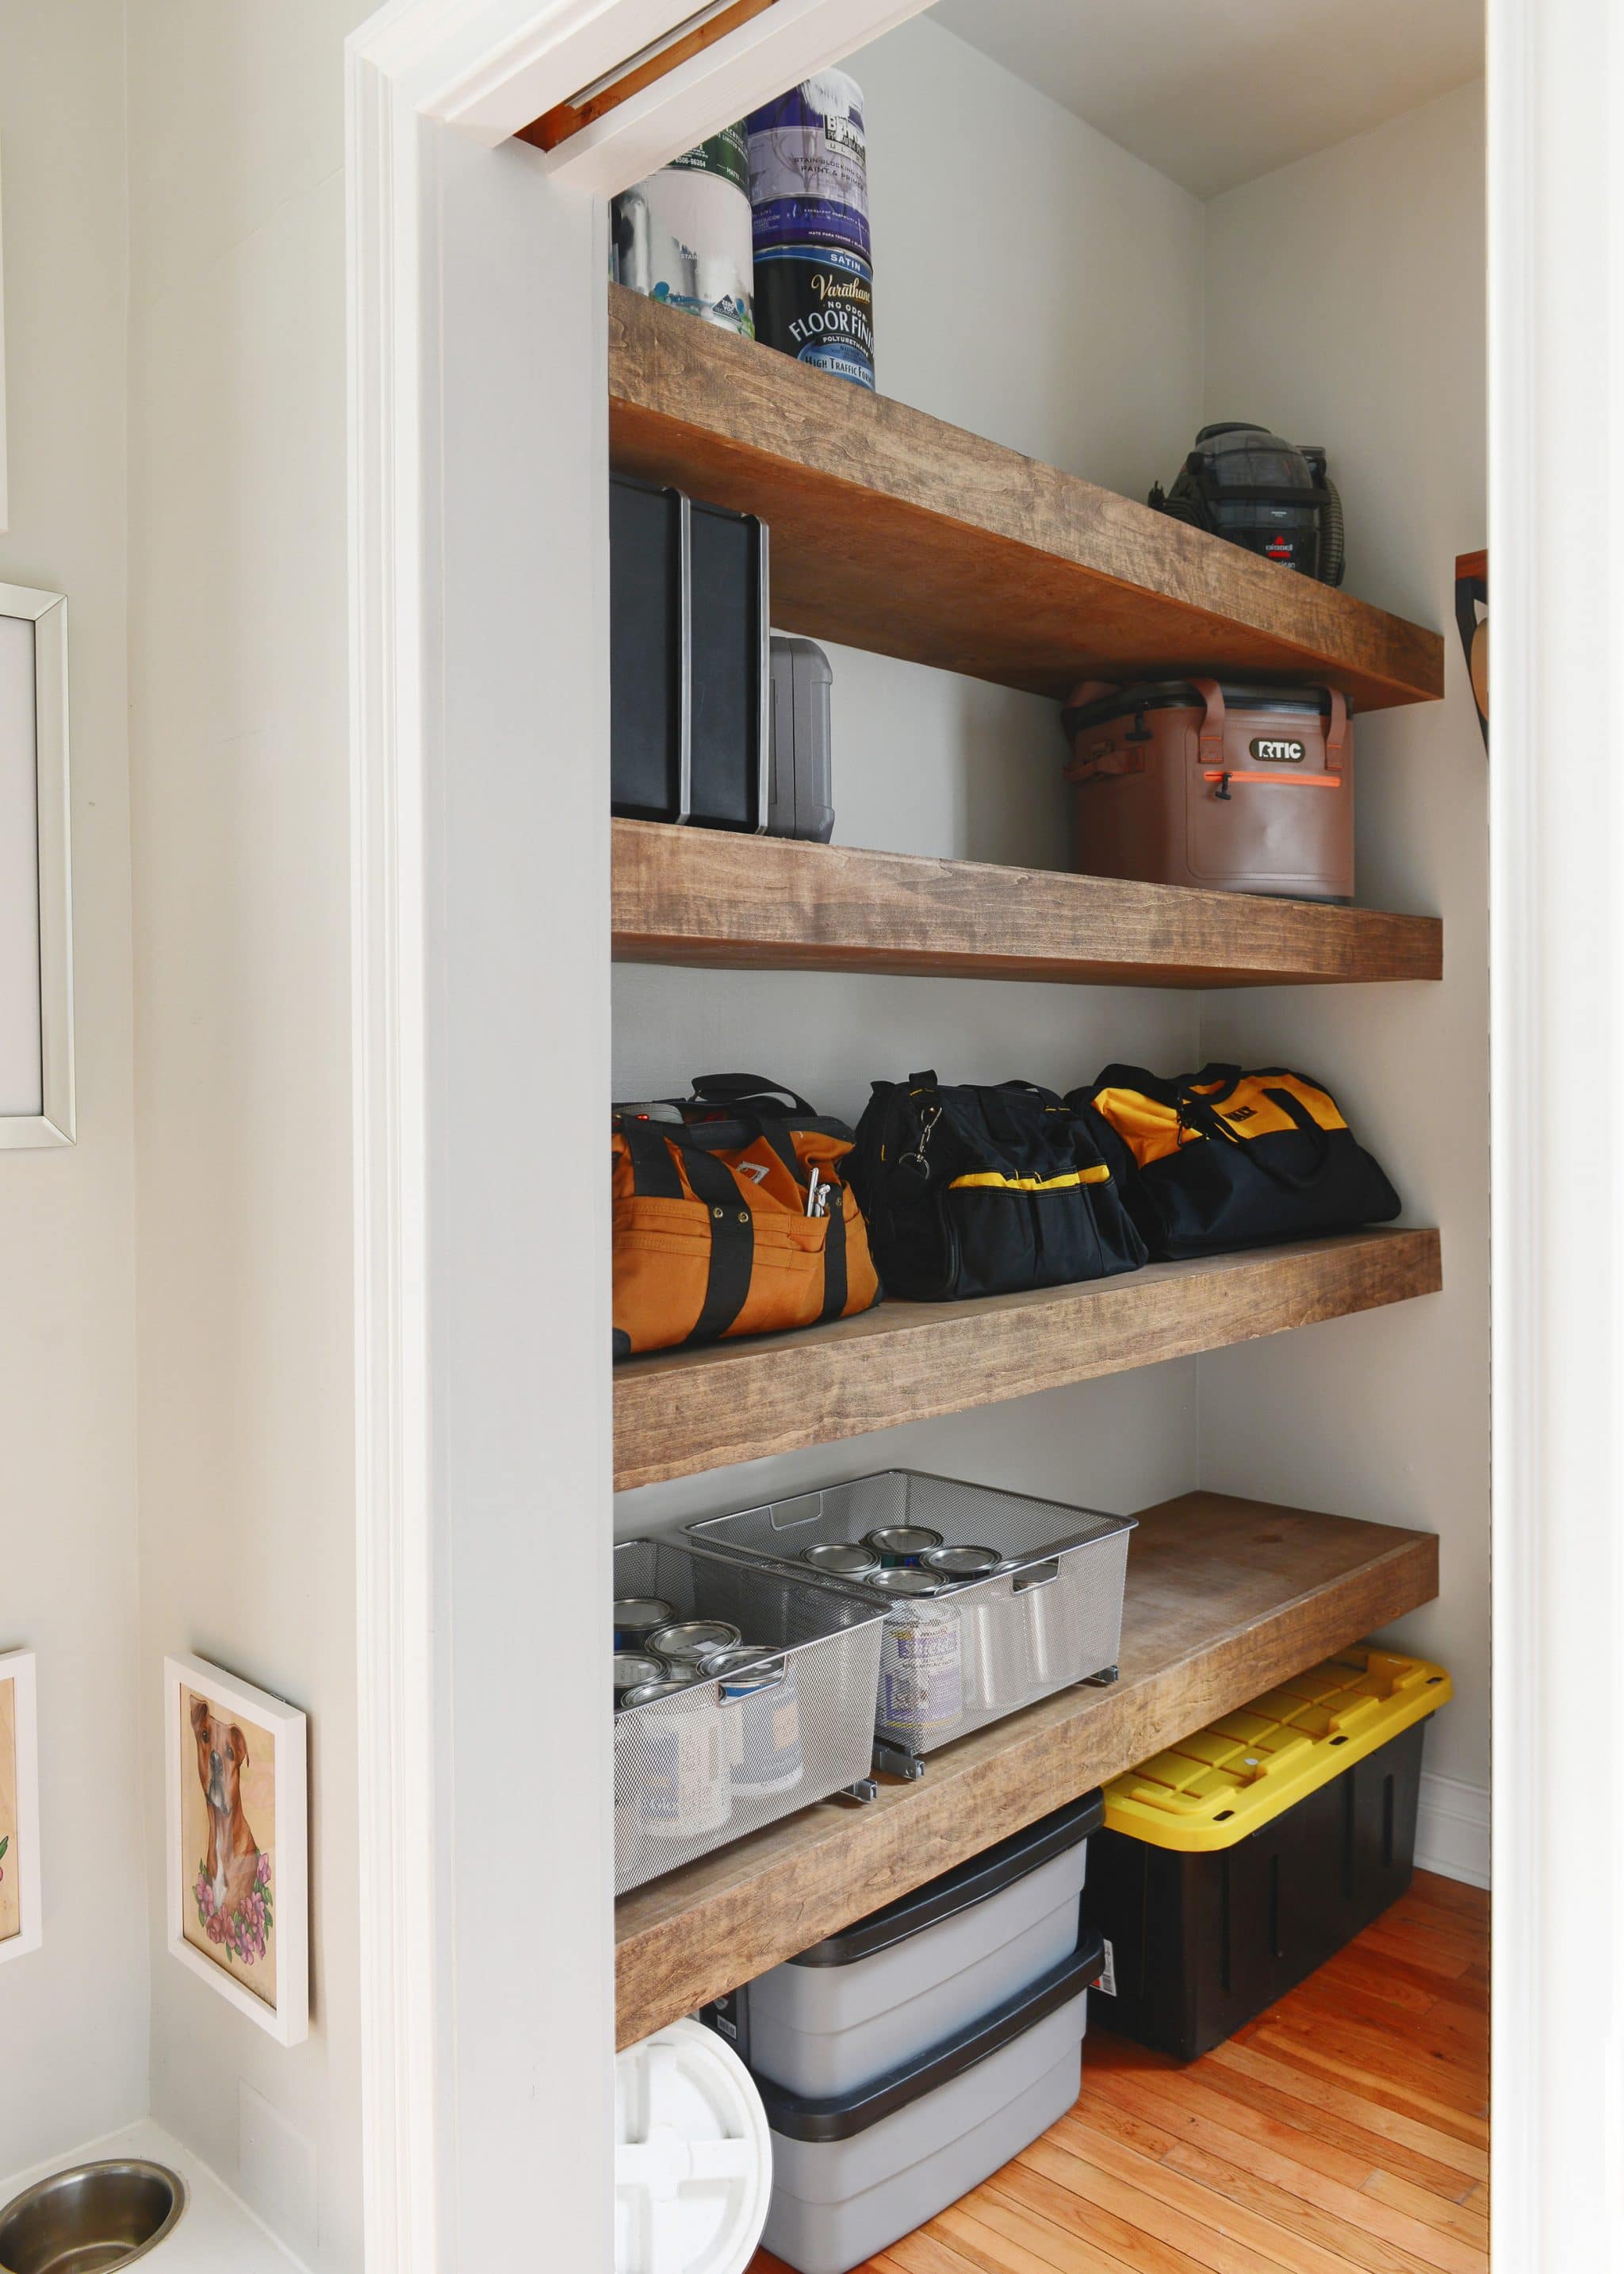 Our most popular project of all time! Floating shelves in the workshop // via Yellow Brick Home